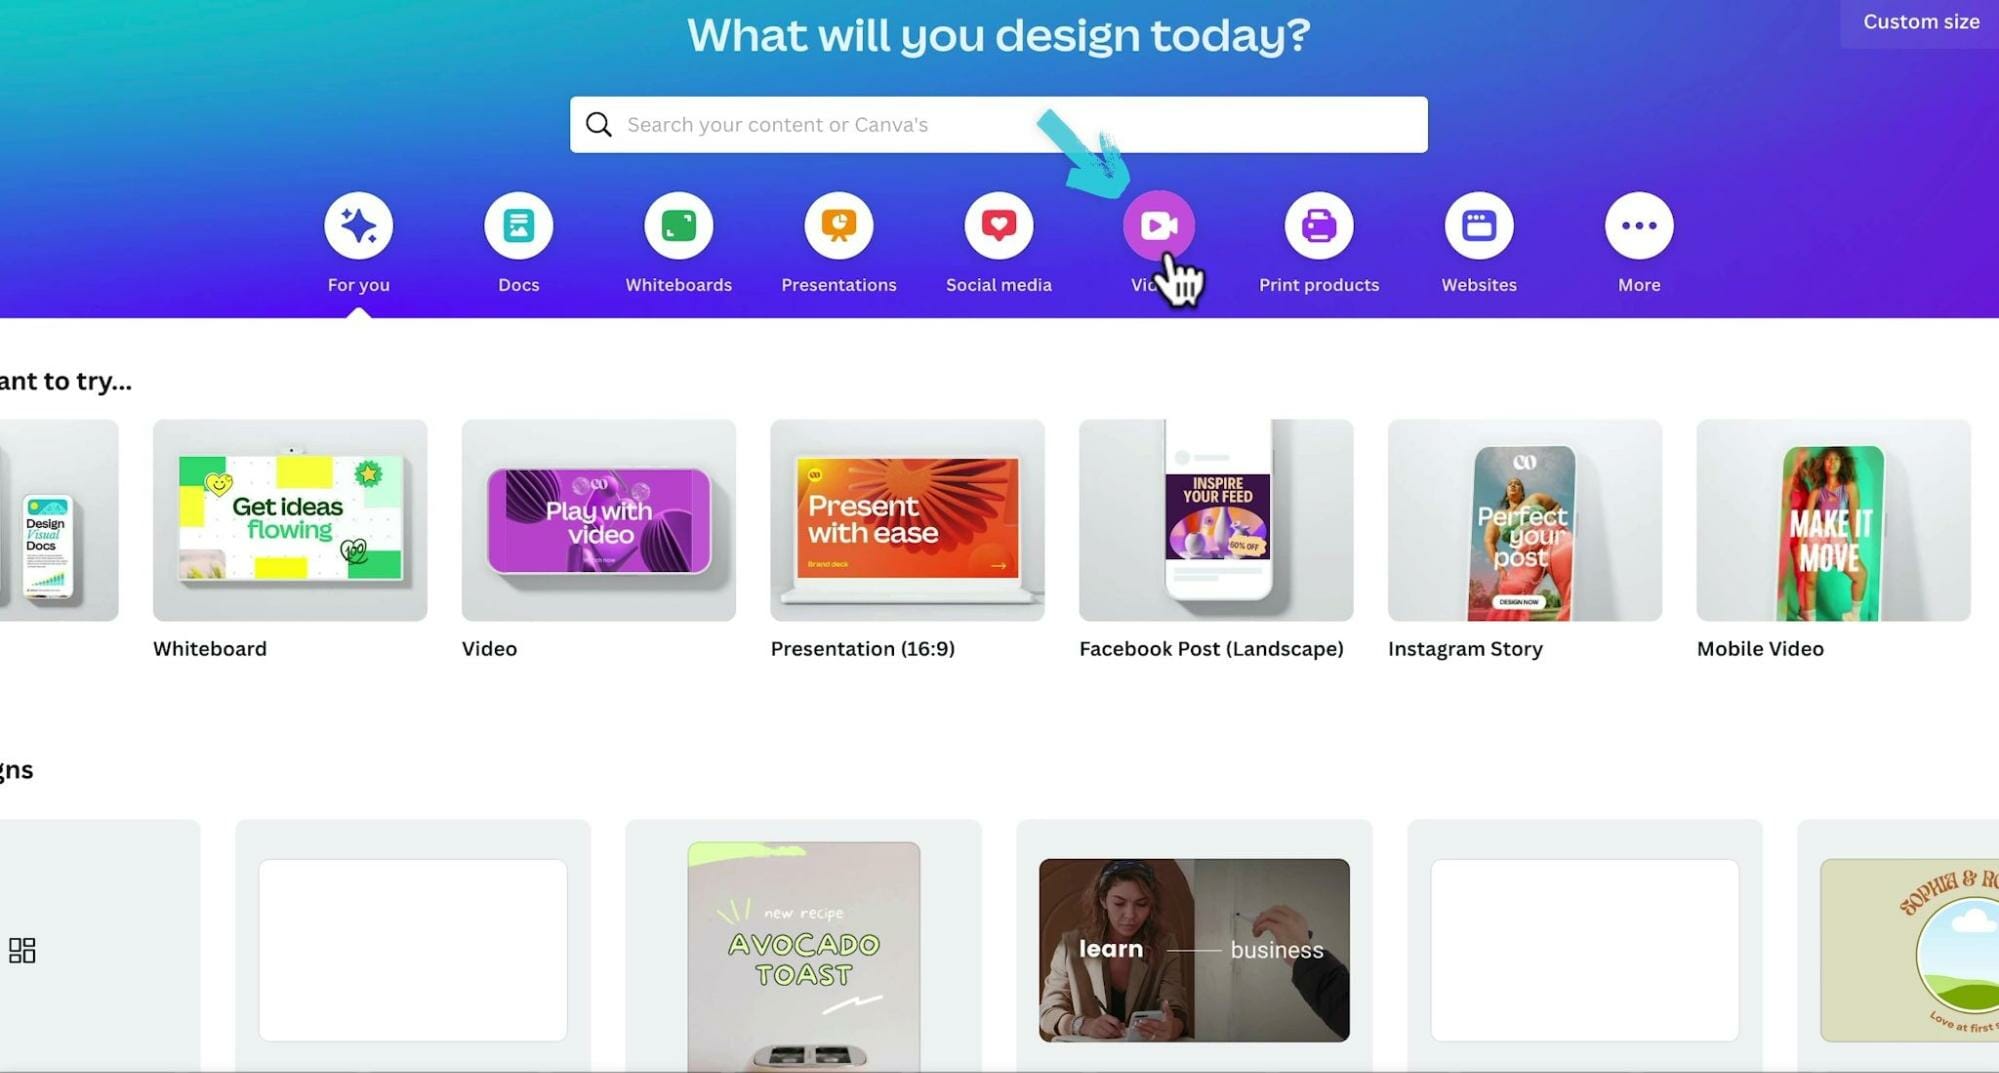 Canva Home Page with 'Video' project category selected